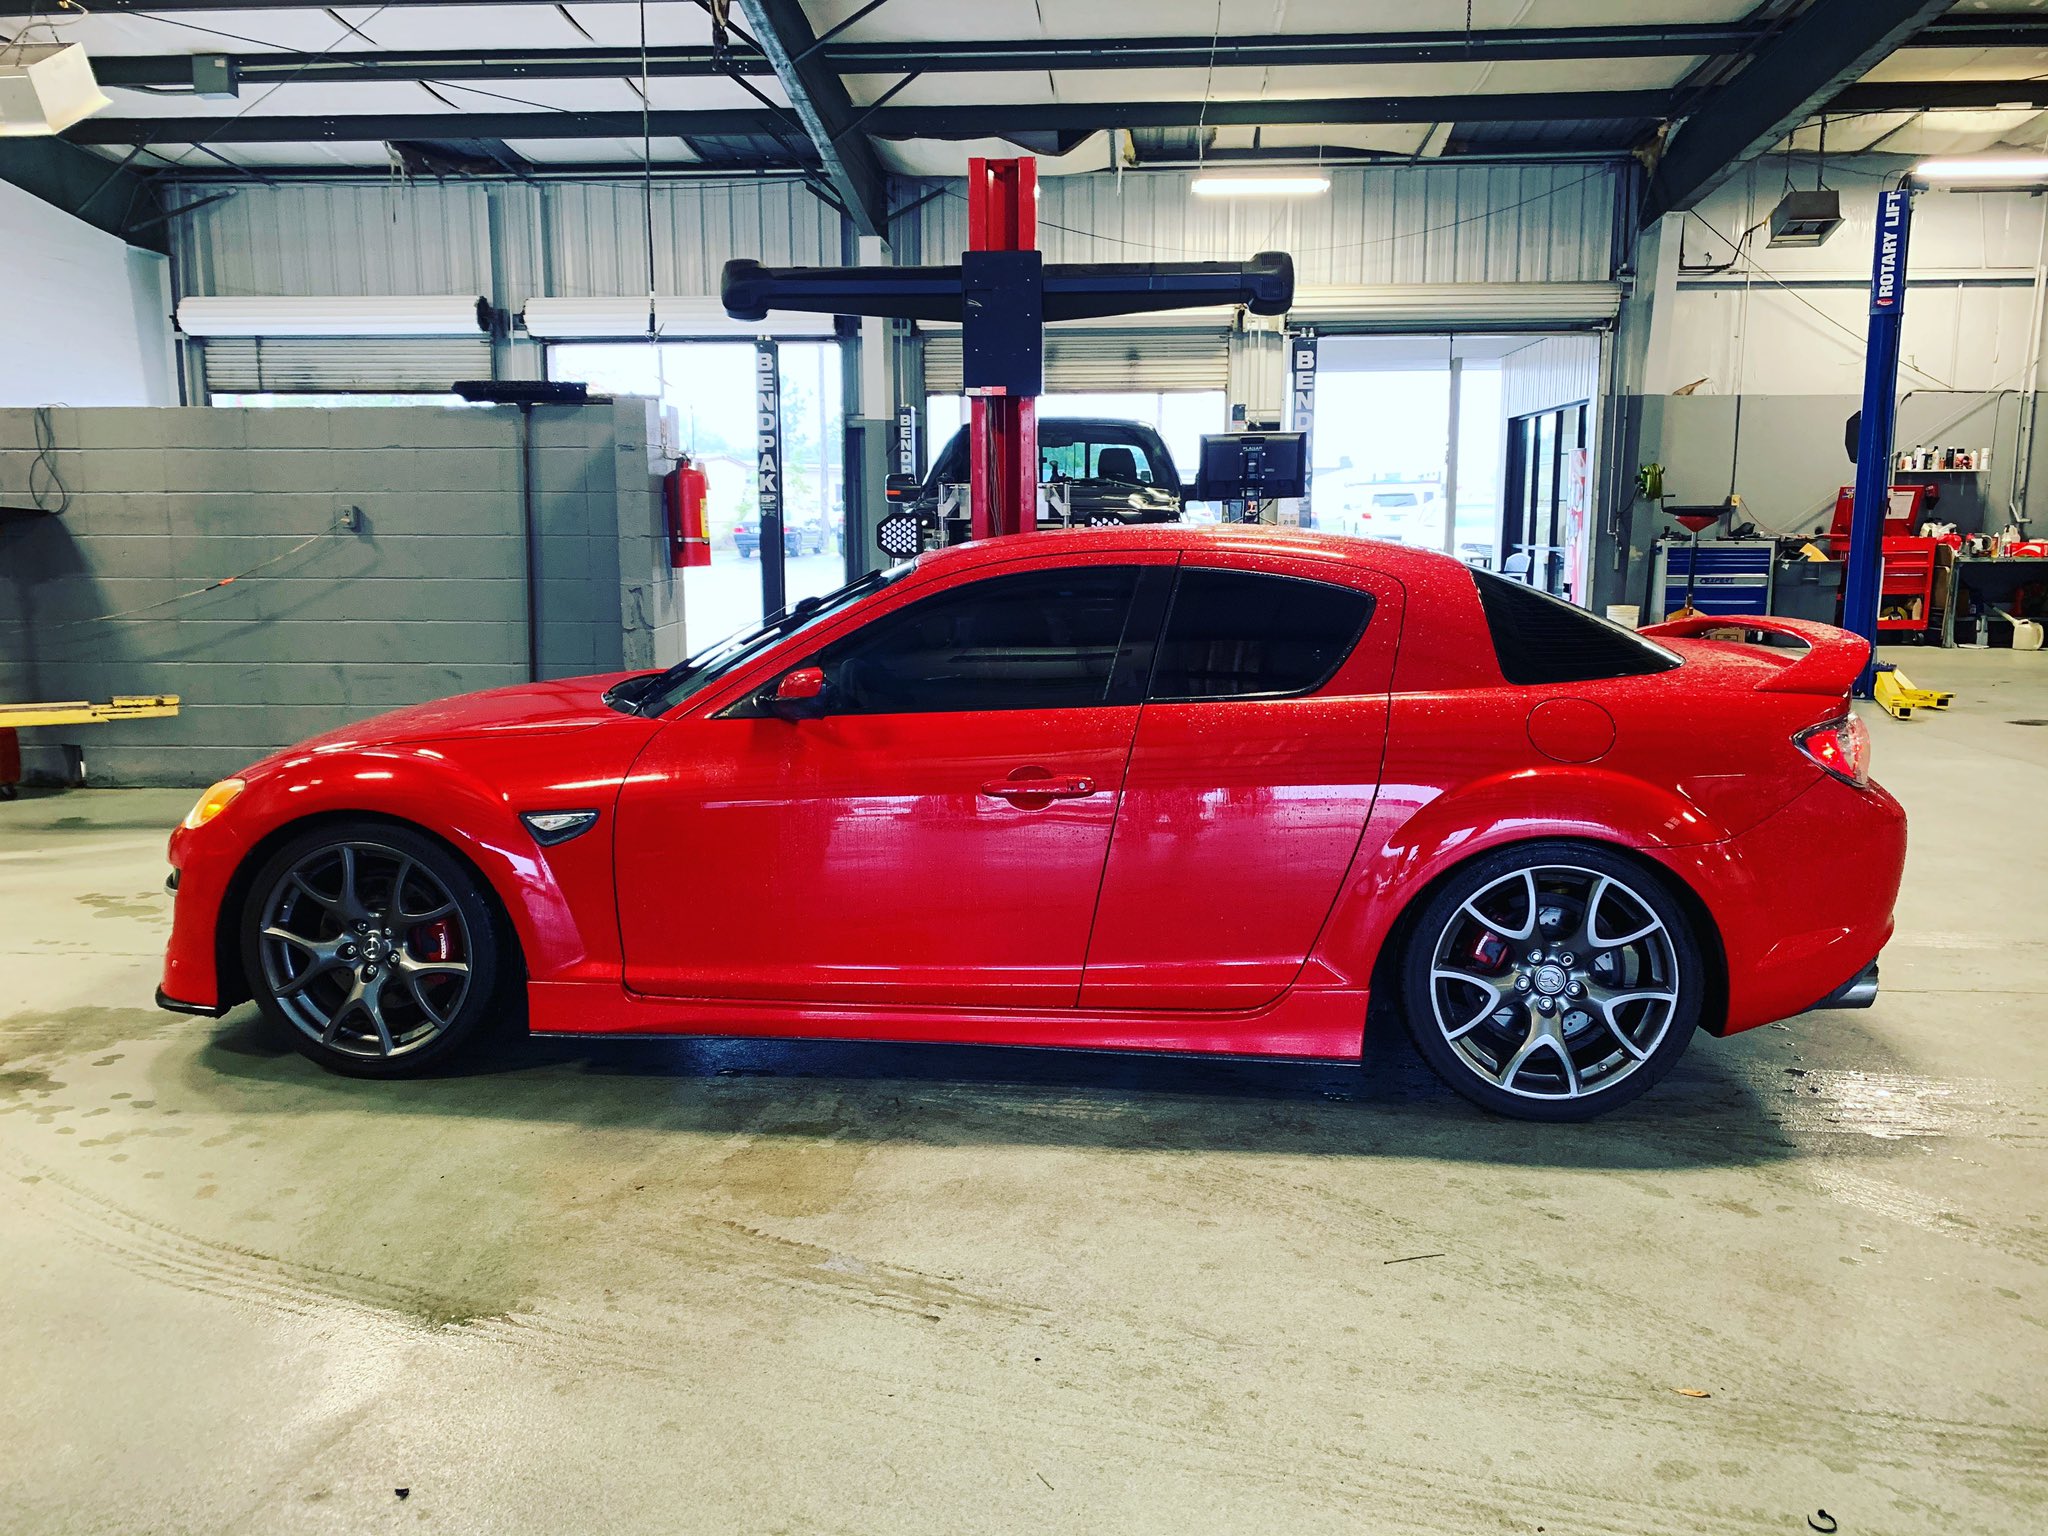 pubertet åbning Melankoli Jonathan Sewell SELLS on Twitter: "This awesome 2010 Mazda RX-8 in Velocity  Red is here for service today. Red is my favorite color, and this car is  beautiful! #mazda #rx8 #mitchellmazda https://t.co/MIw2cC2c18" /